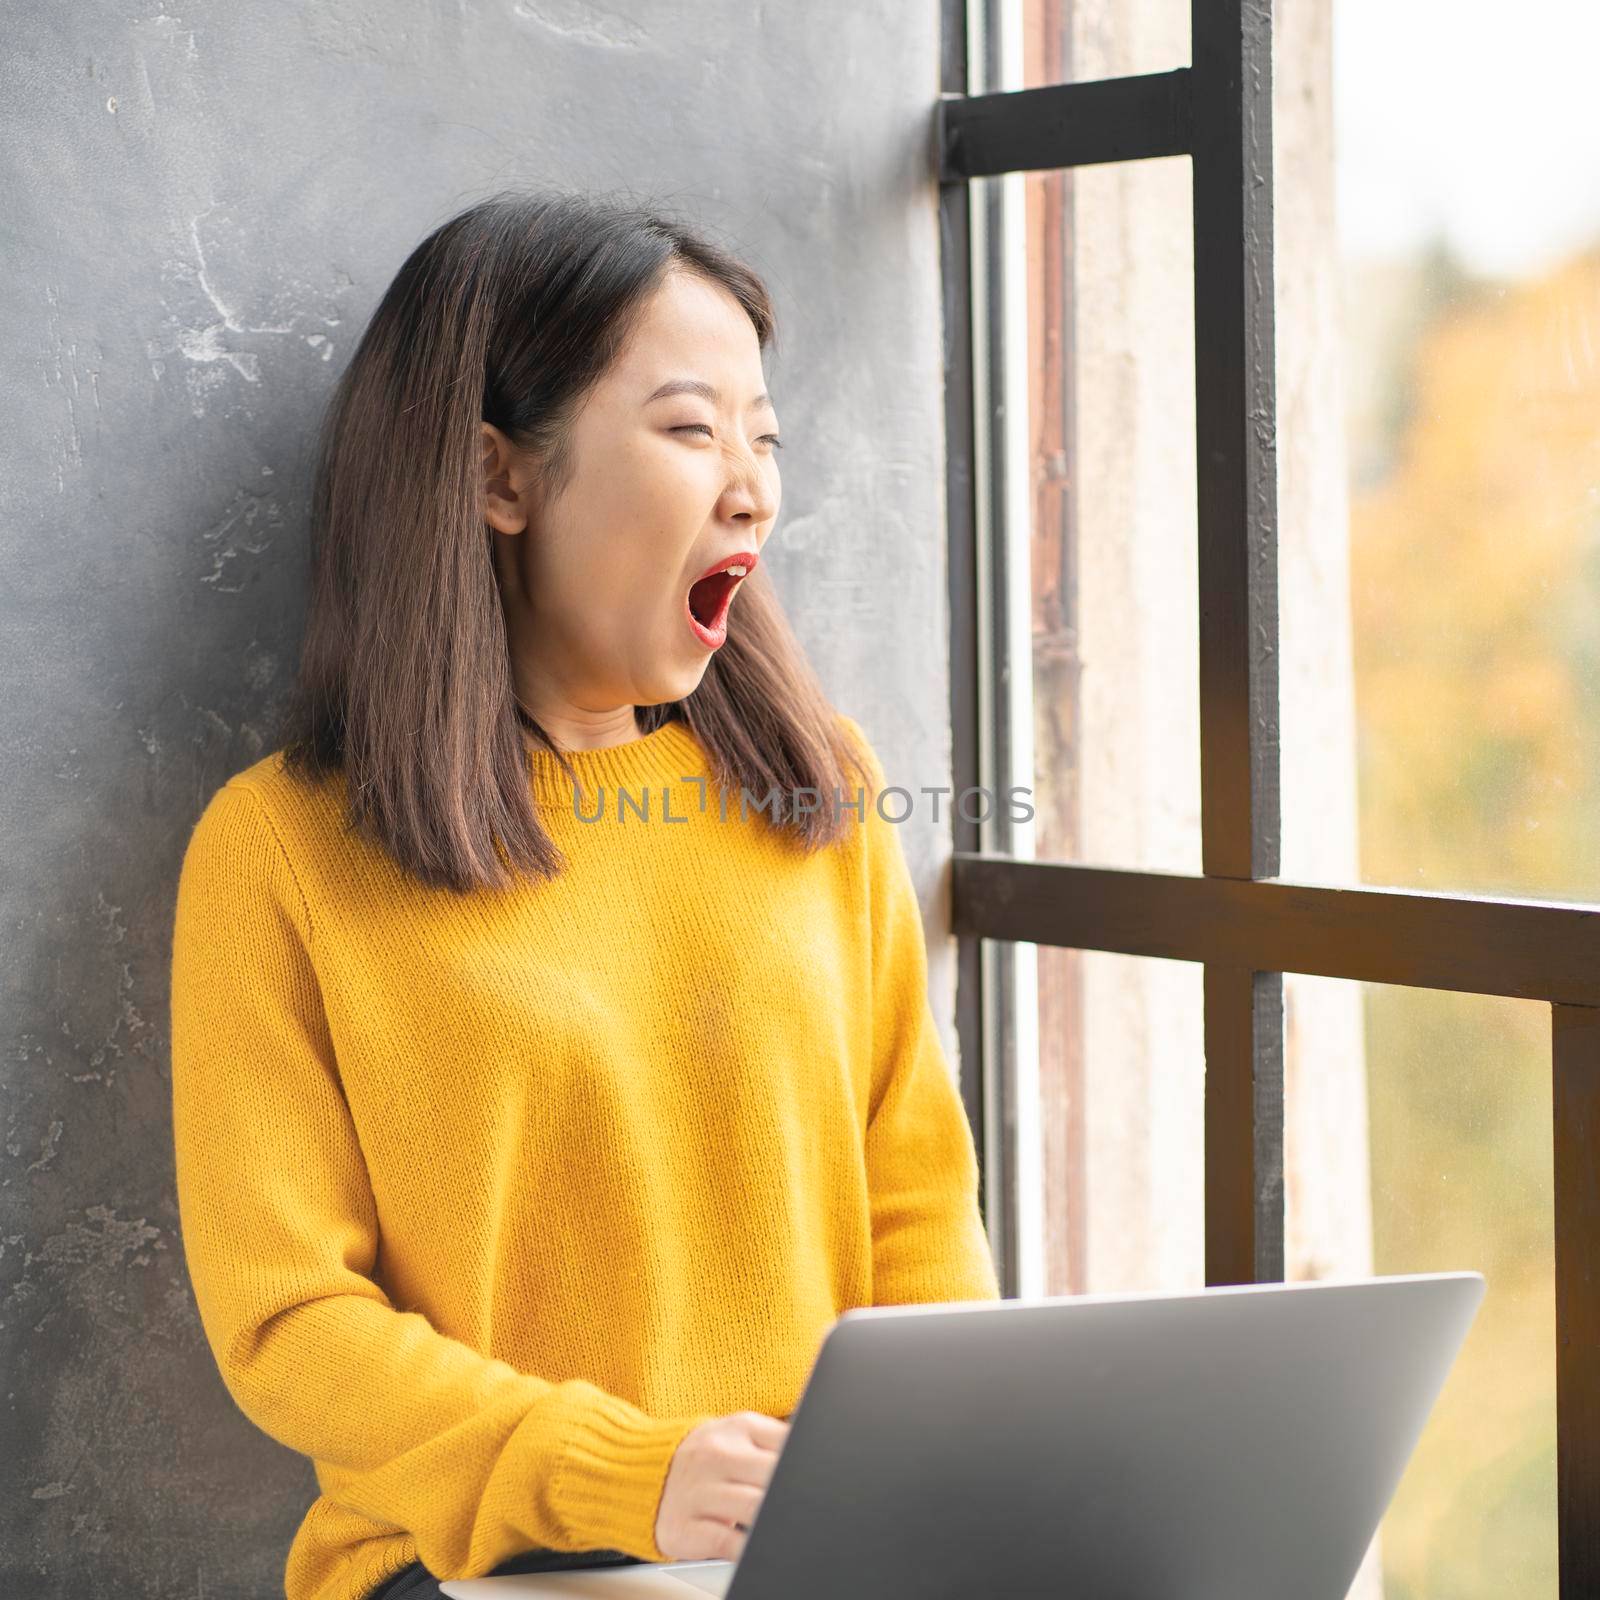 Asian woman yawning due to overworking and exhausting. Young lady in bright yellow jumper working on laptop at home or in cafe. Business oriental female